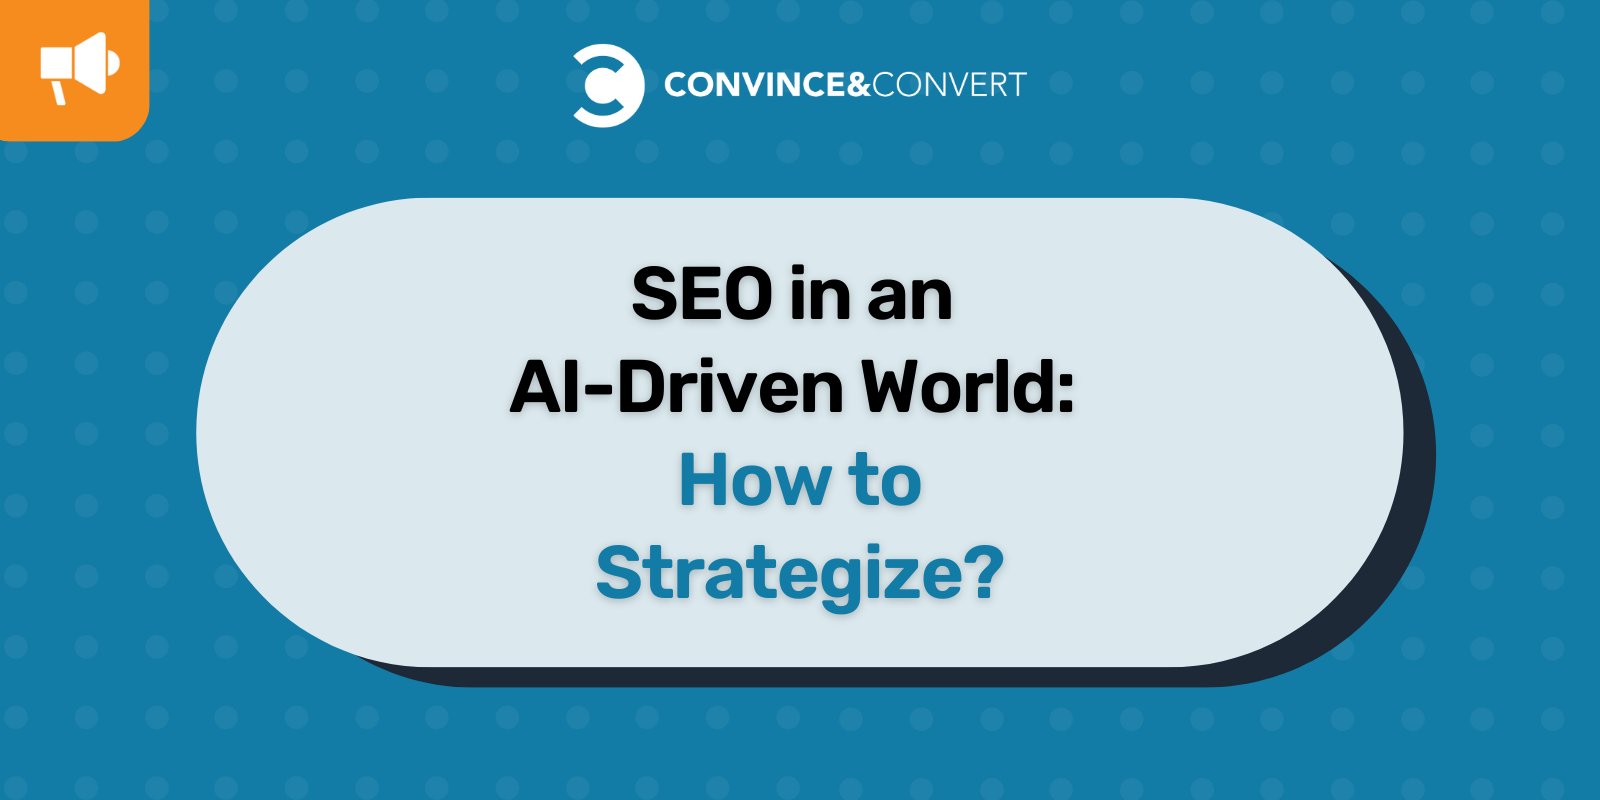 SEO in an AI-Driven World How to Strategize